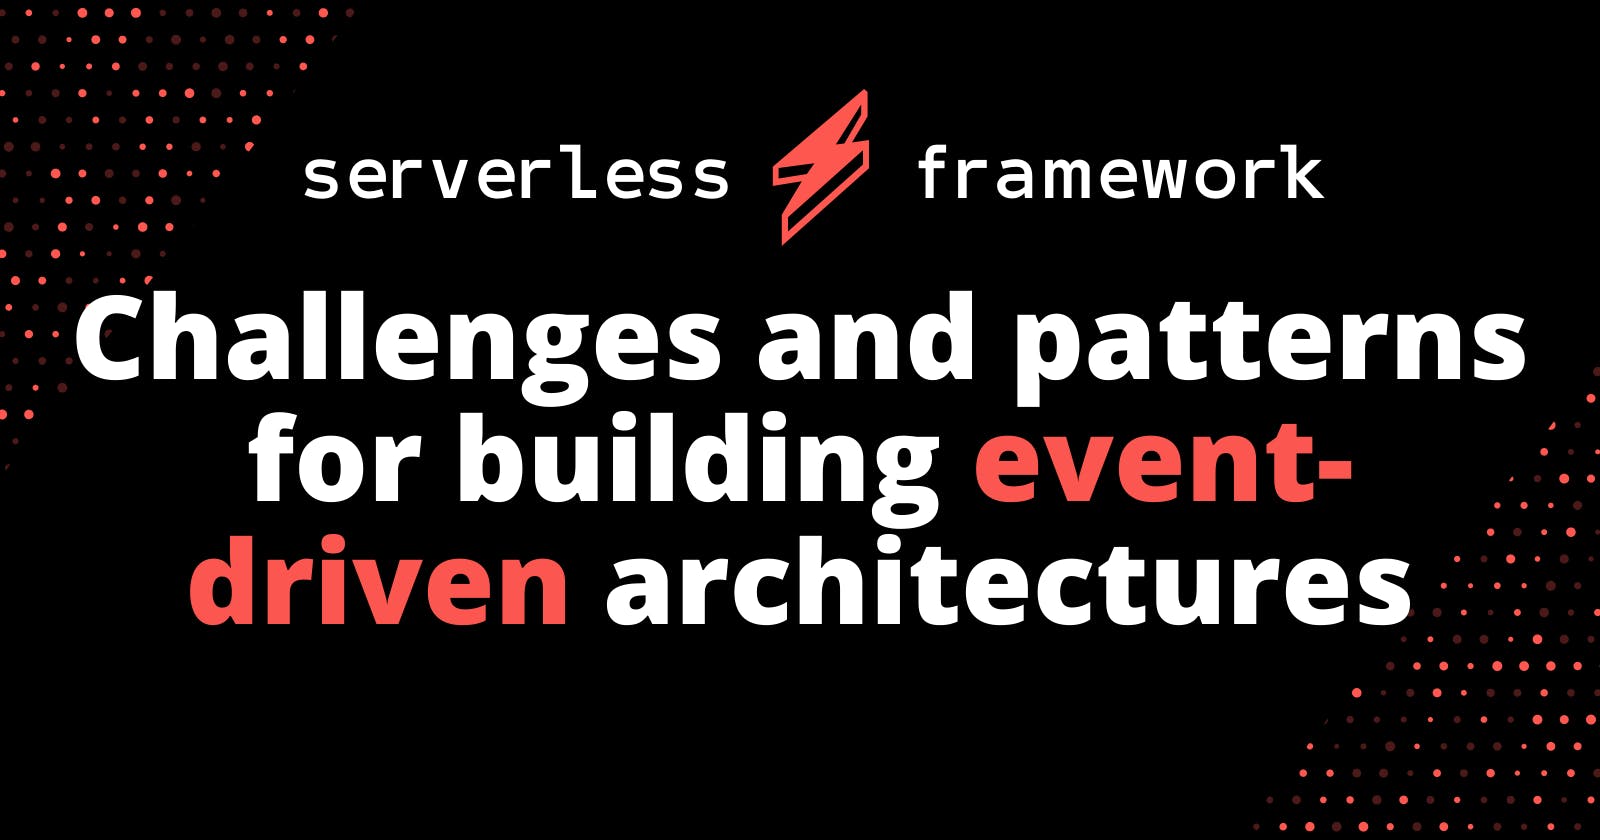 Challenges and patterns for building event-driven architectures